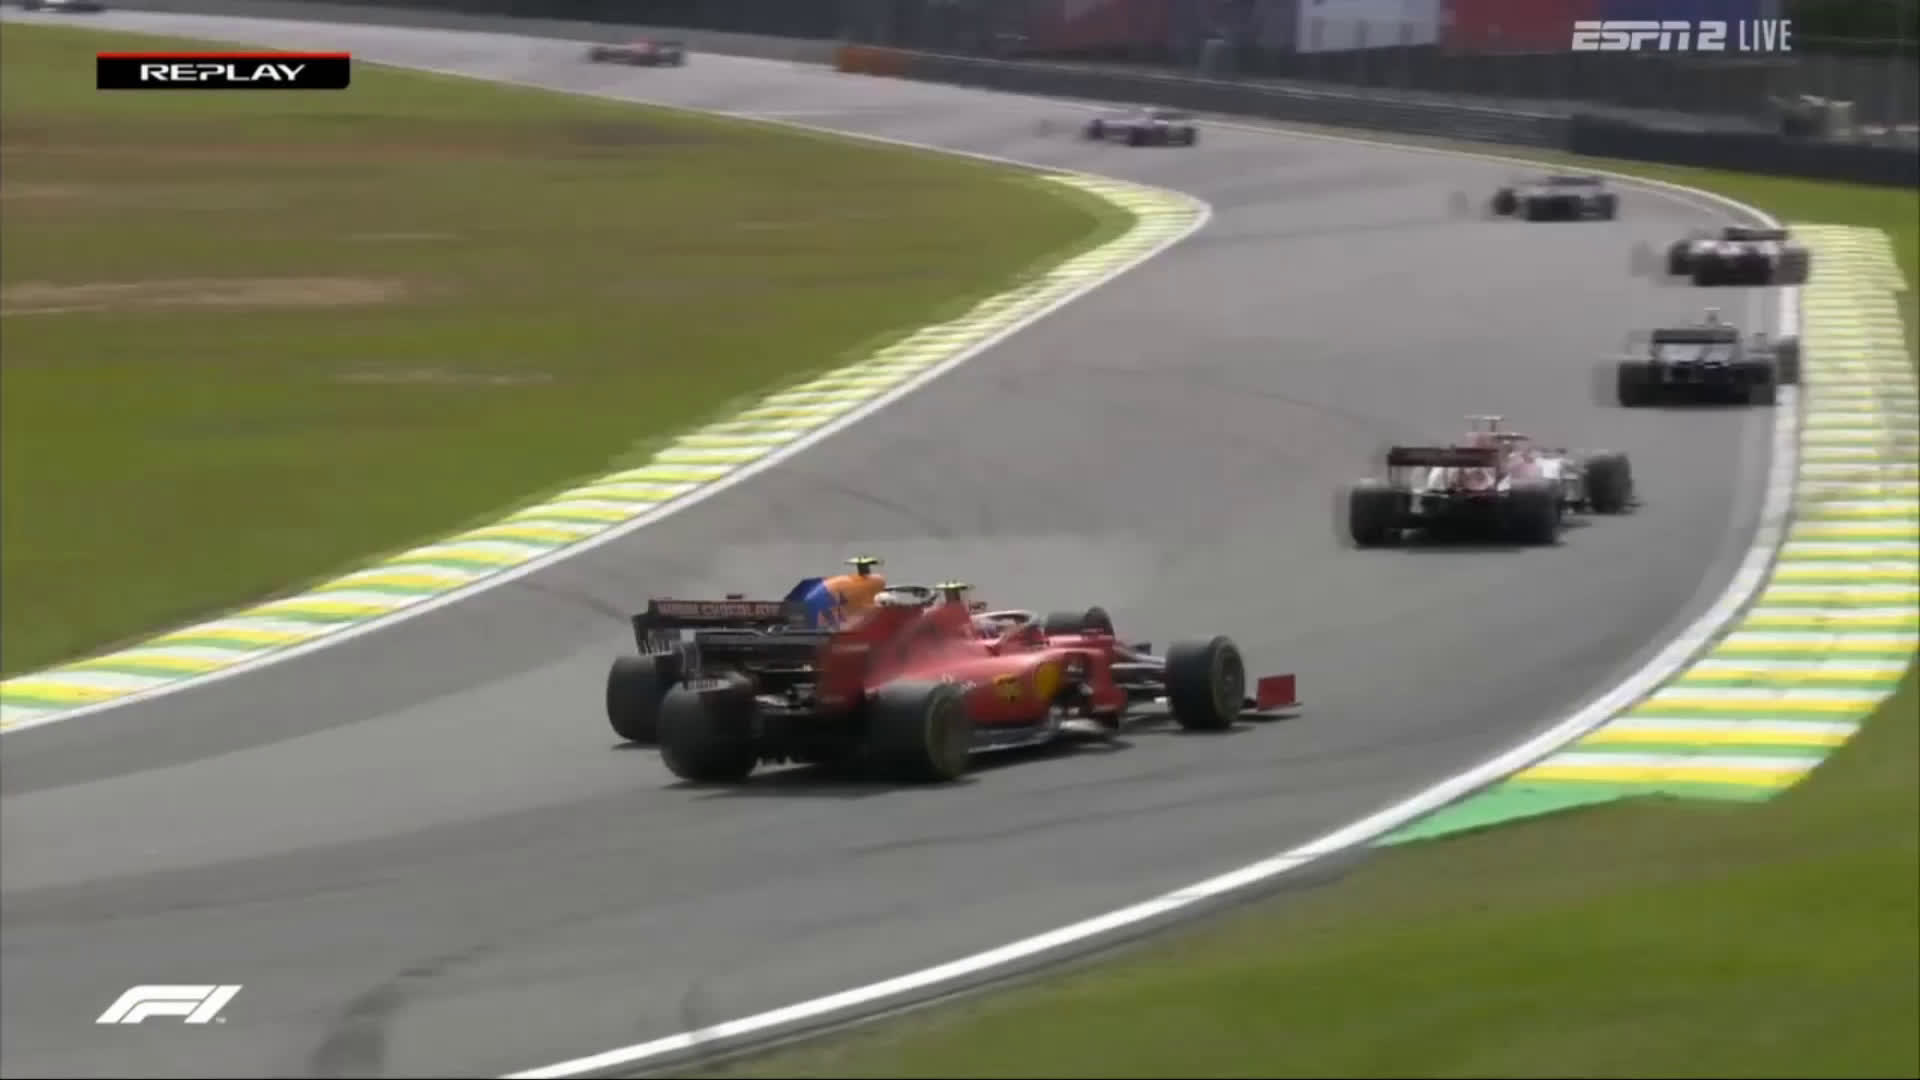 Watch a replay of Charles Leclercs overtakes in 2019 F1 Brazilian GP